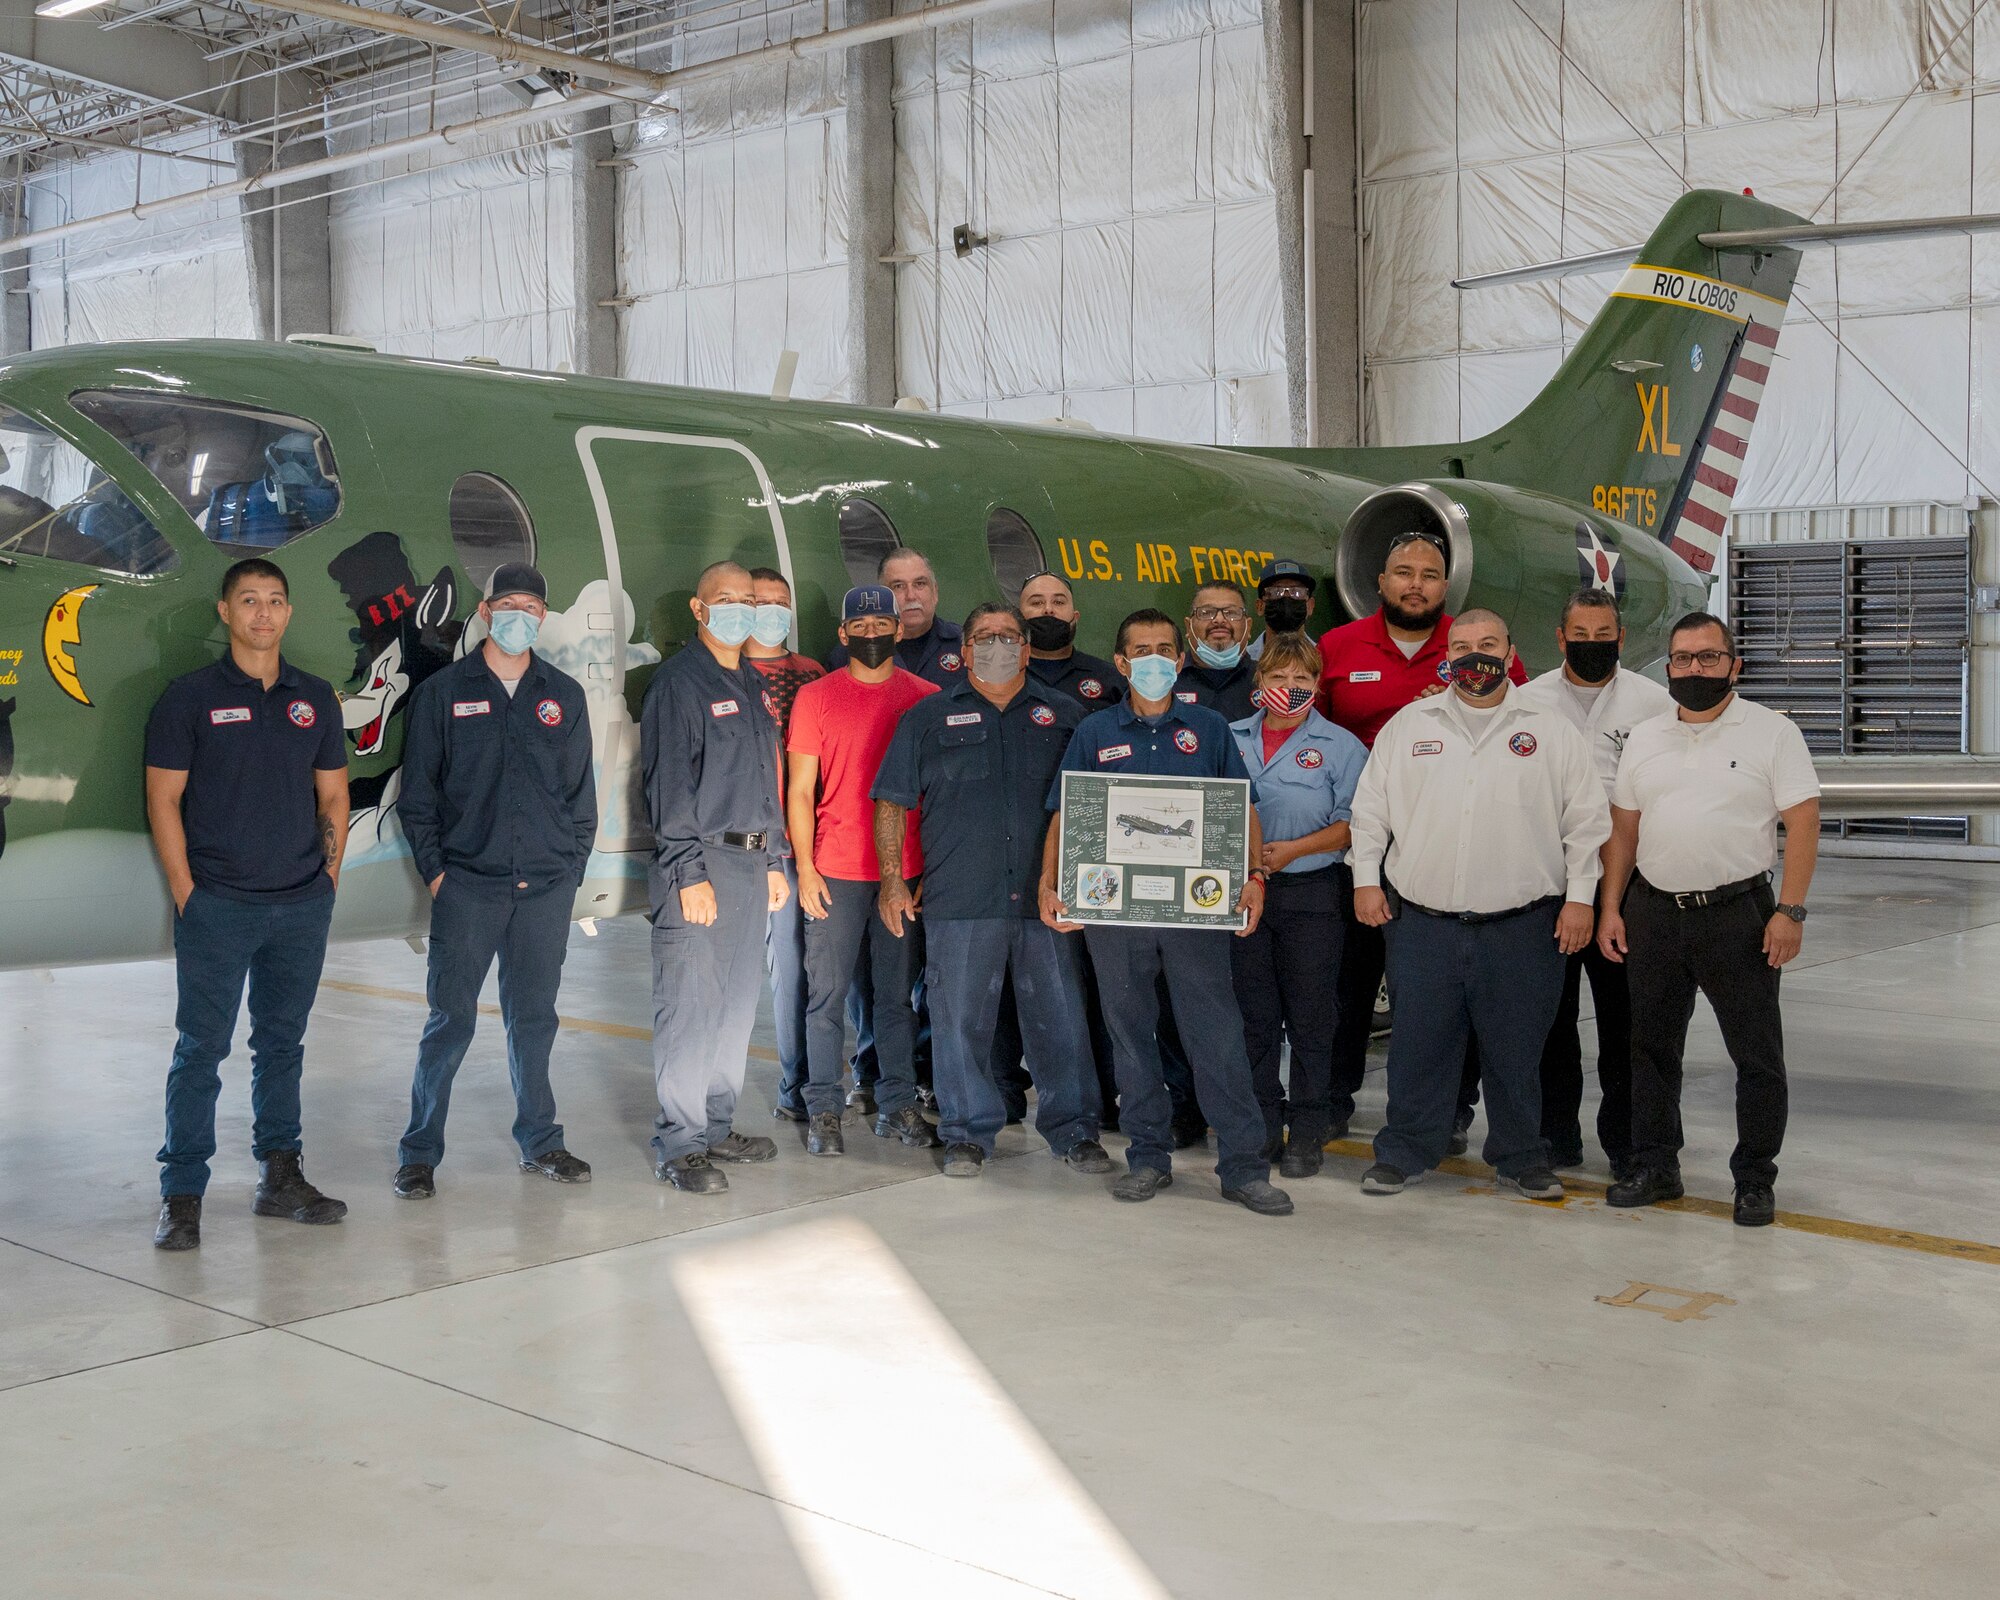 Aircraft maintainers from Laughlin Air Force Base, Texas, pose with the plaque given to them for their work with the heritage tail on August 13, 2021. The paint scheme of the aircraft reaches back to the Douglas B-18 “Bolo” of World War II and honors the Airmen who served aboard, the nose of the aircraft is also inscribed with Capt. Glen Edward’s name in memory of his service to the U.S. Air Force. (U.S. Air Force Photo by Senior Airman Nicholas Larsen)